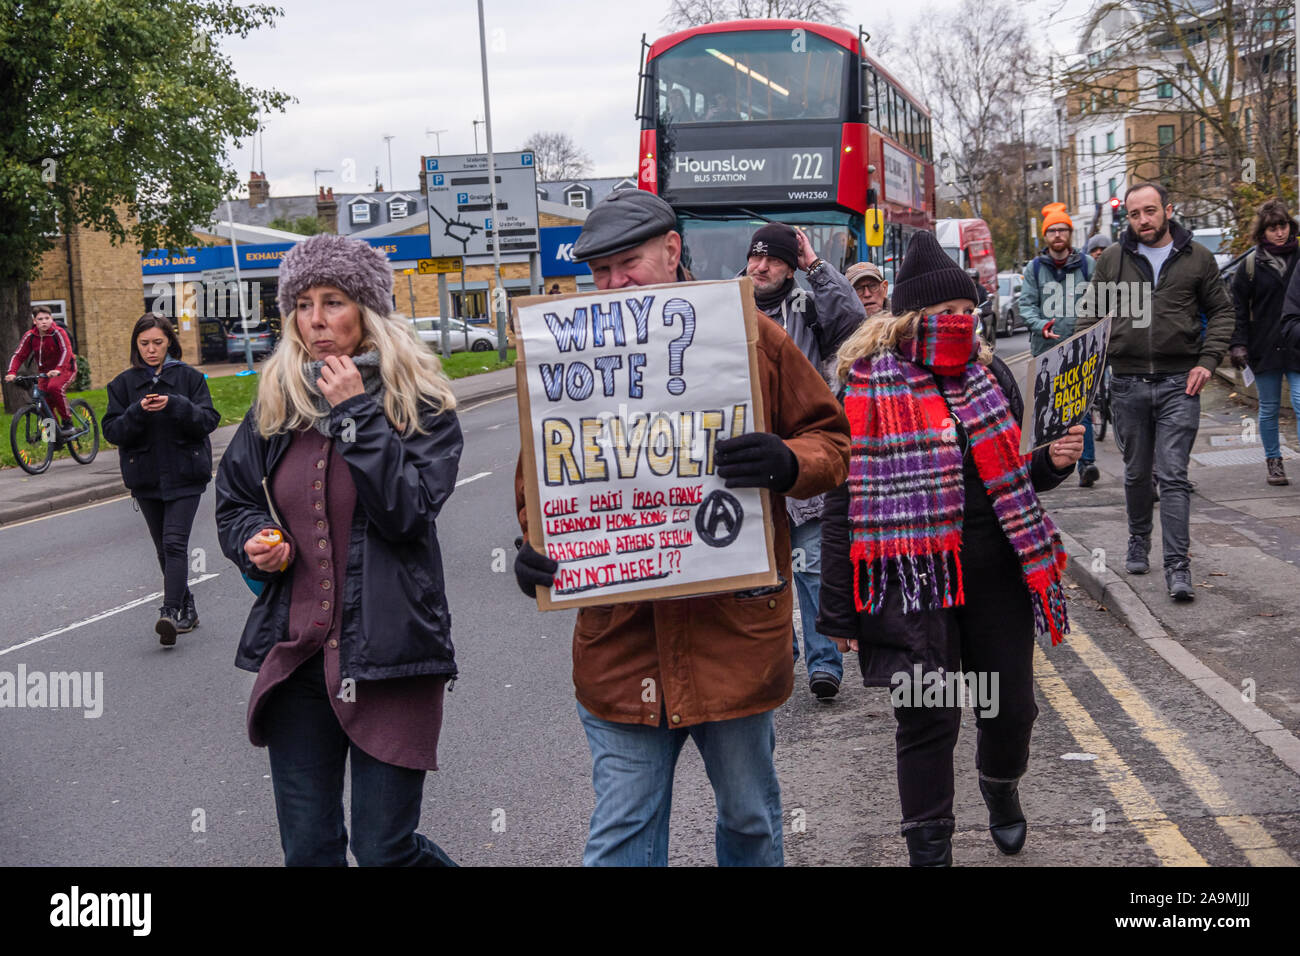 London, UK. 16th November 2019. Anarchists on the FCKBoris march through Uxbridge  urge people to revolt rather than vote. The march urged everyone to vote against Boris Johnson and kick him out for his racist, elitist politics. They marched with a sound system on a bus to Brunel University to persuade students. Johnson had a majority of just over 5 thousand in 2017 and Labour candidate Ali Milani has strong hopes of beating him and the other 10 candidates. Peter Marshall/Alamy Live News Stock Photo